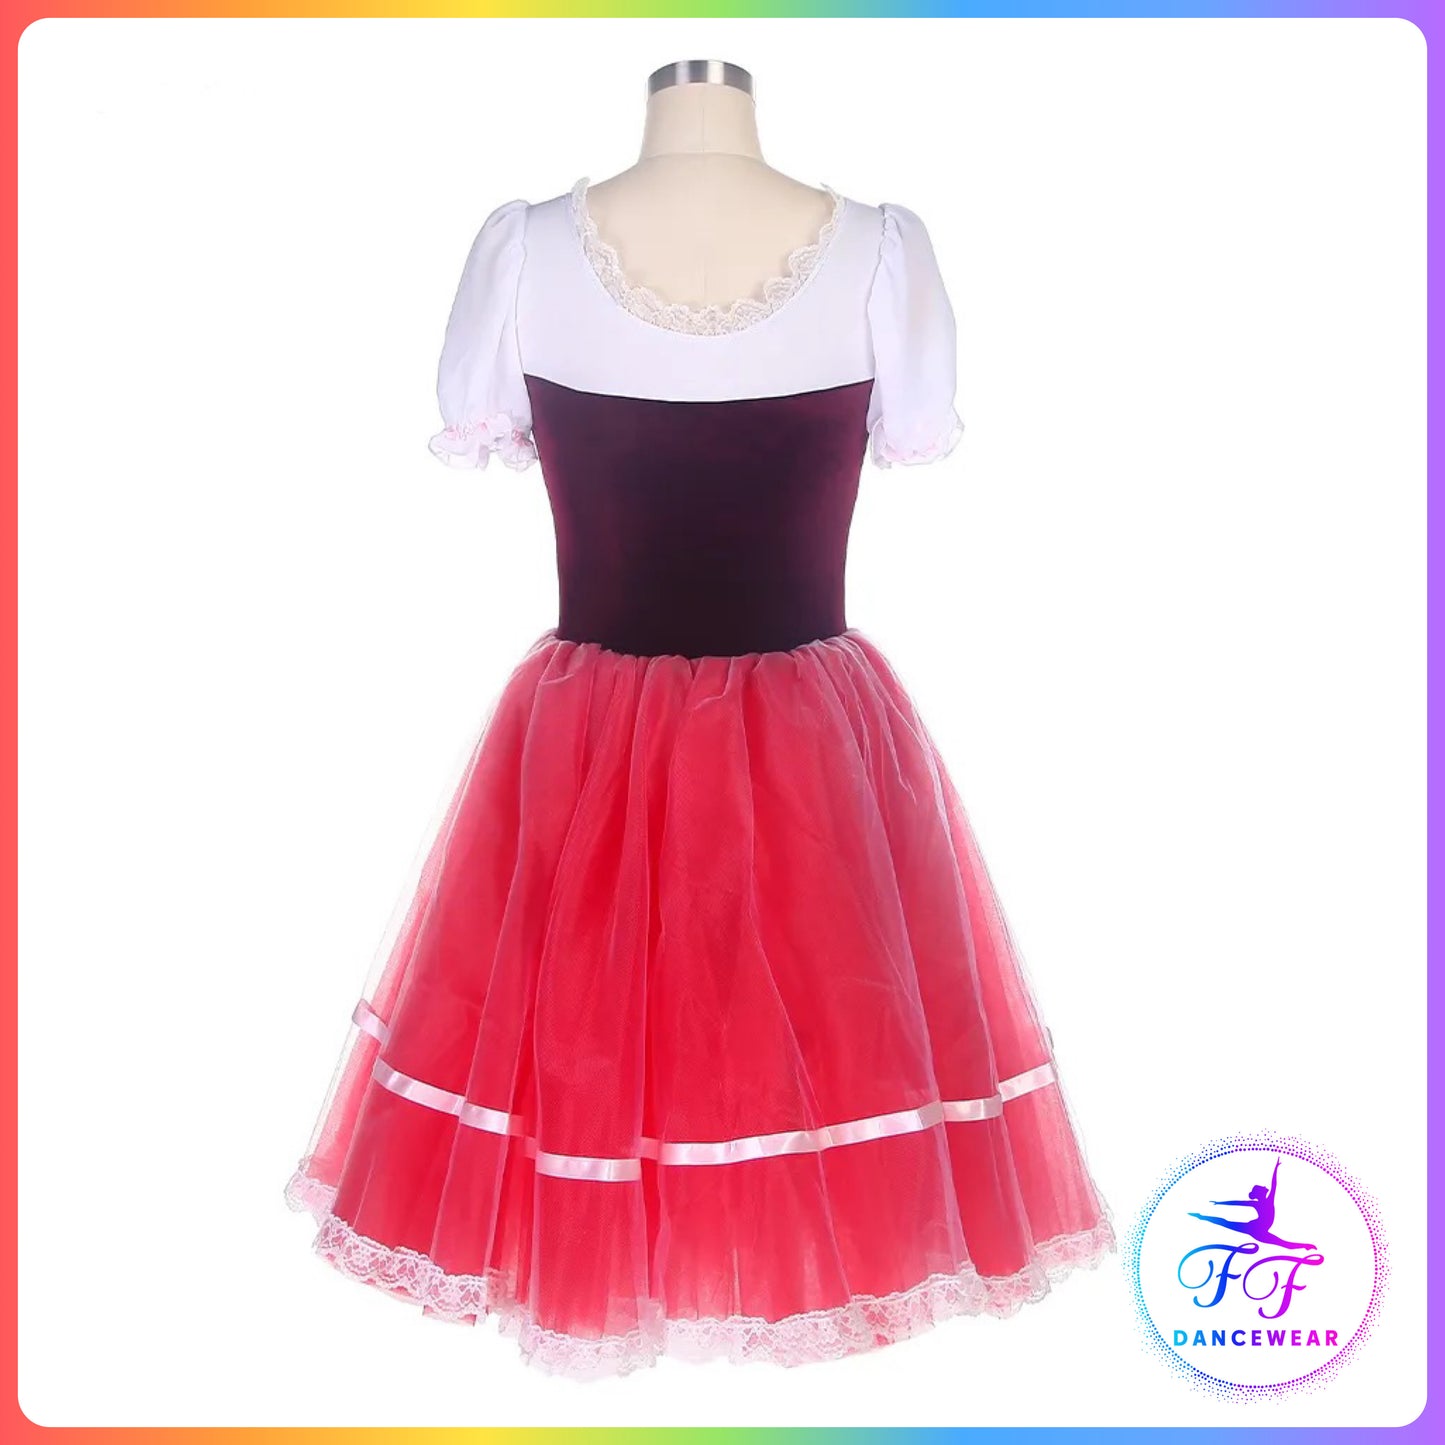 Red Giselle Style Ballet Dress (Child & Adult Sizes)